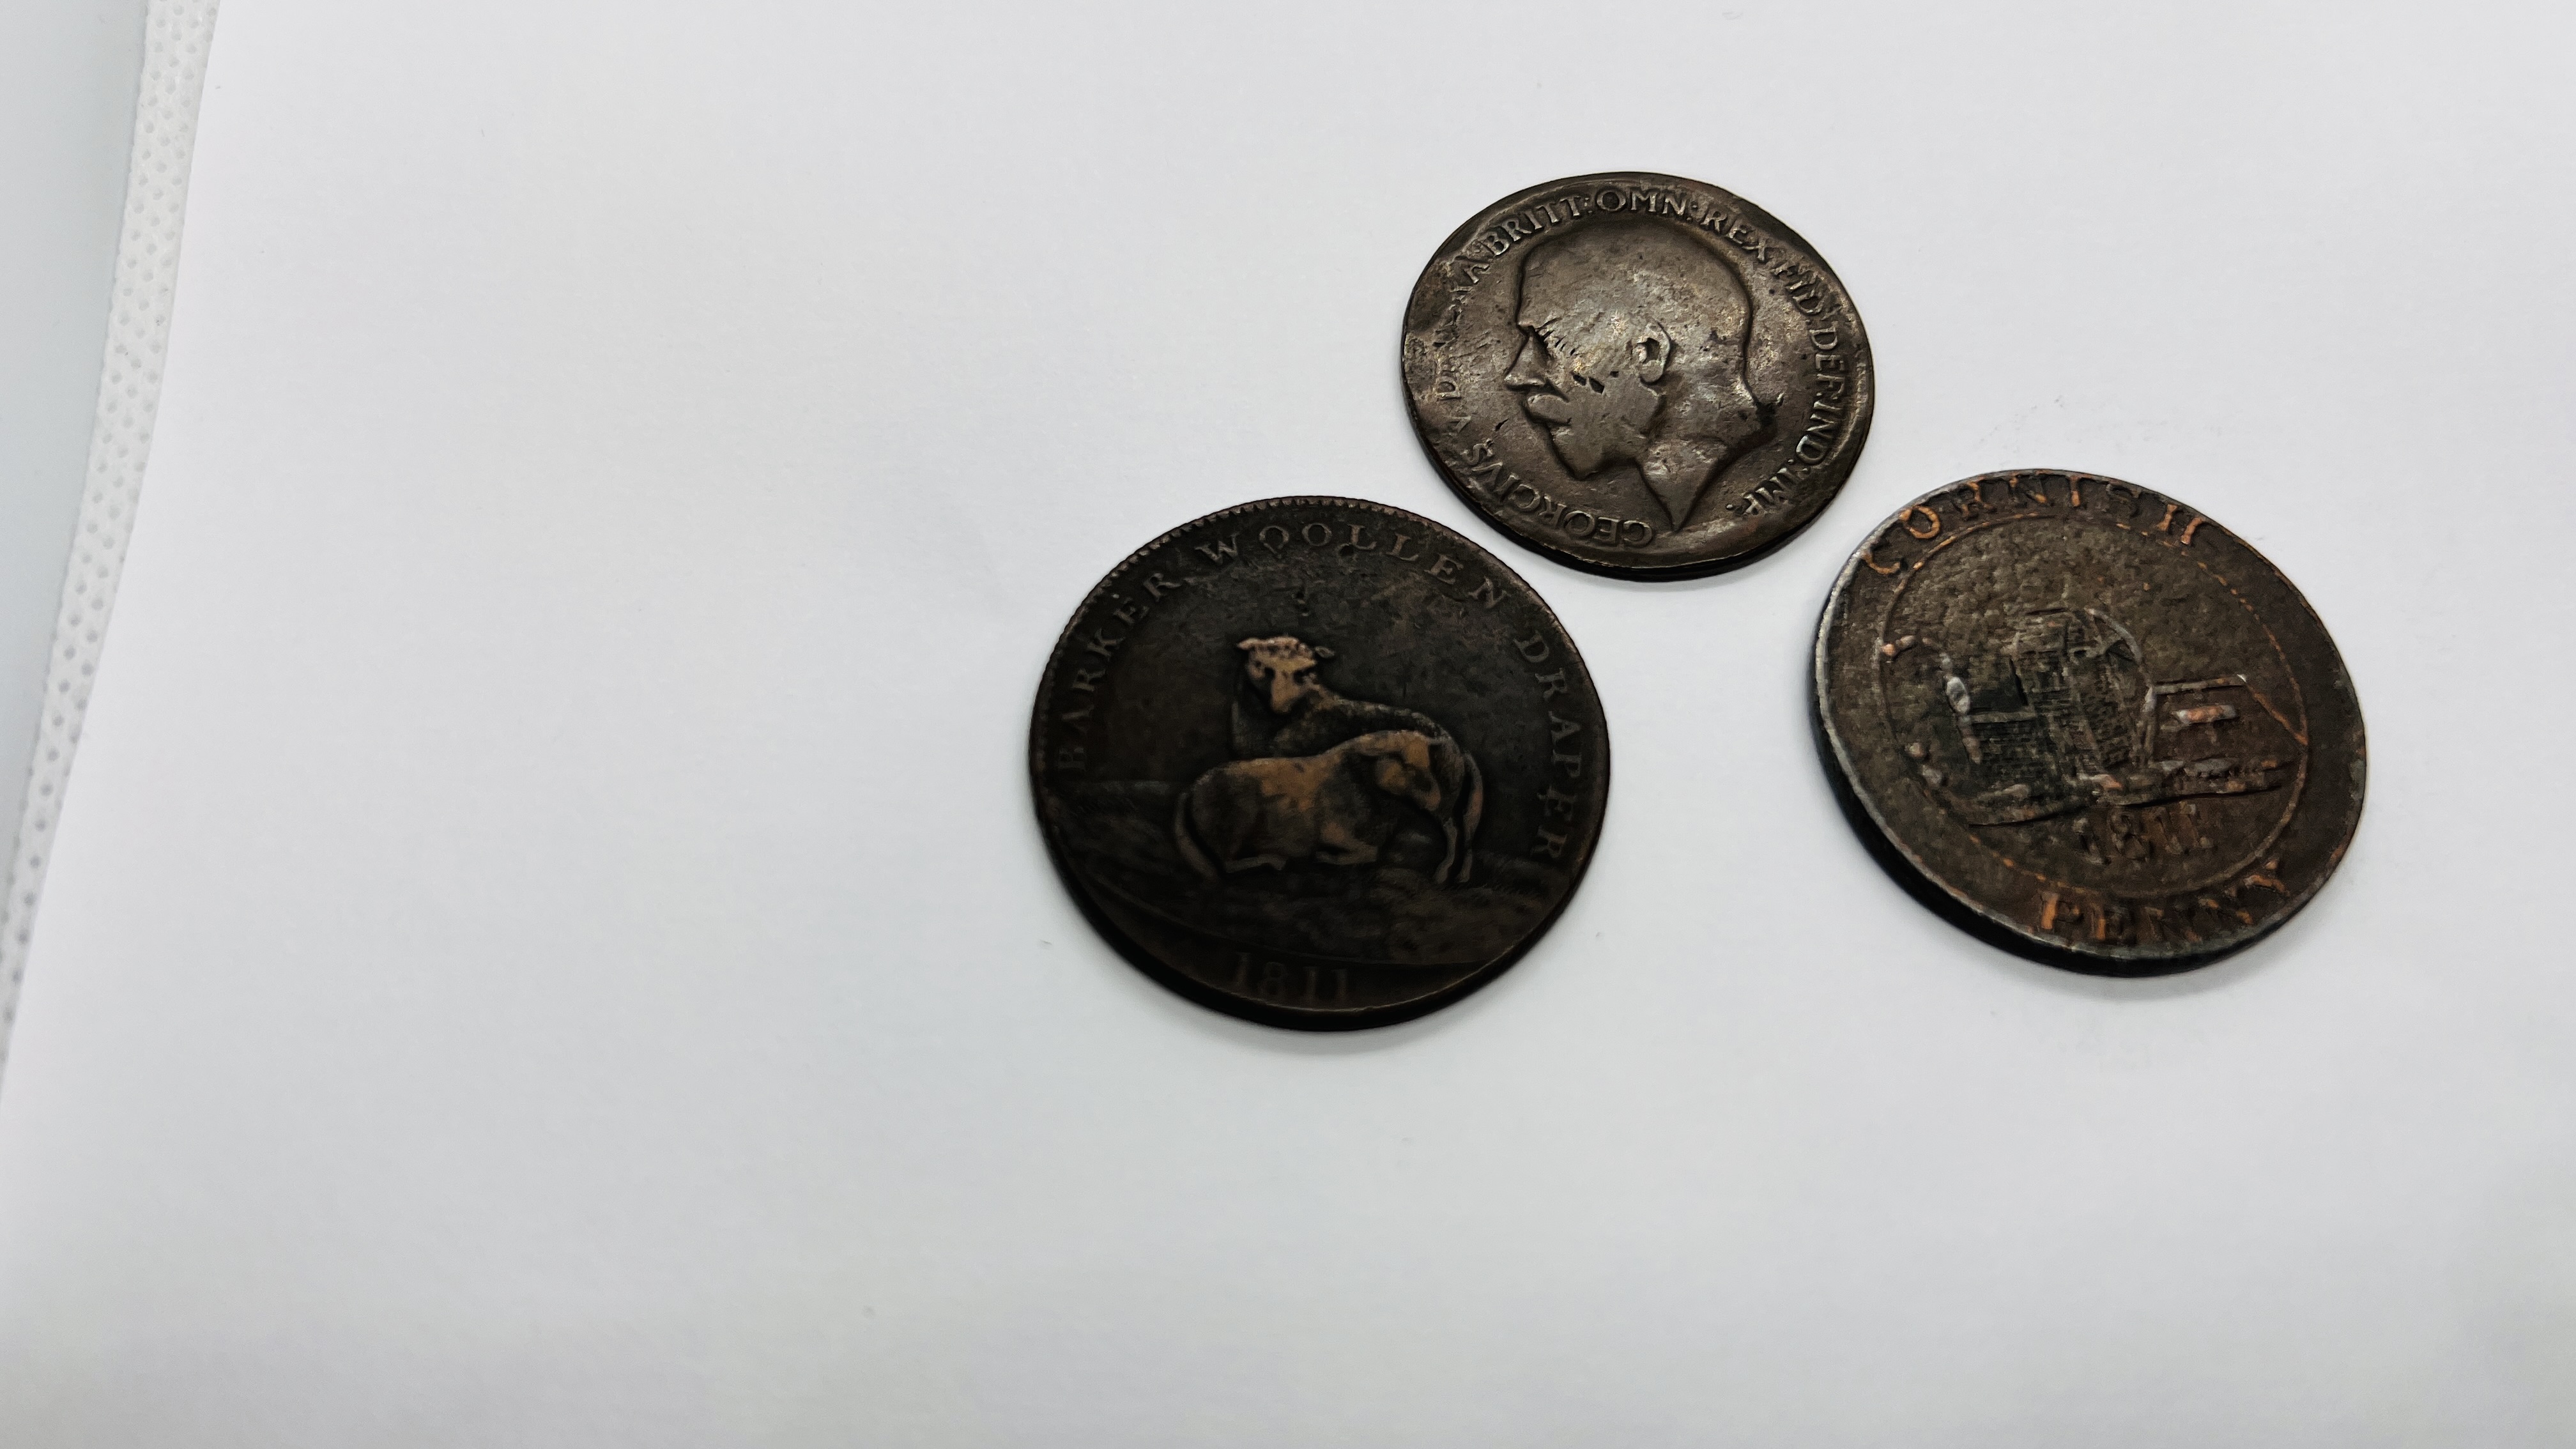 A NORWICH TOKEN 1811, A CORNISH PENNY 1811 AND A DOUBLE HEADED PENNY. - Image 4 of 5